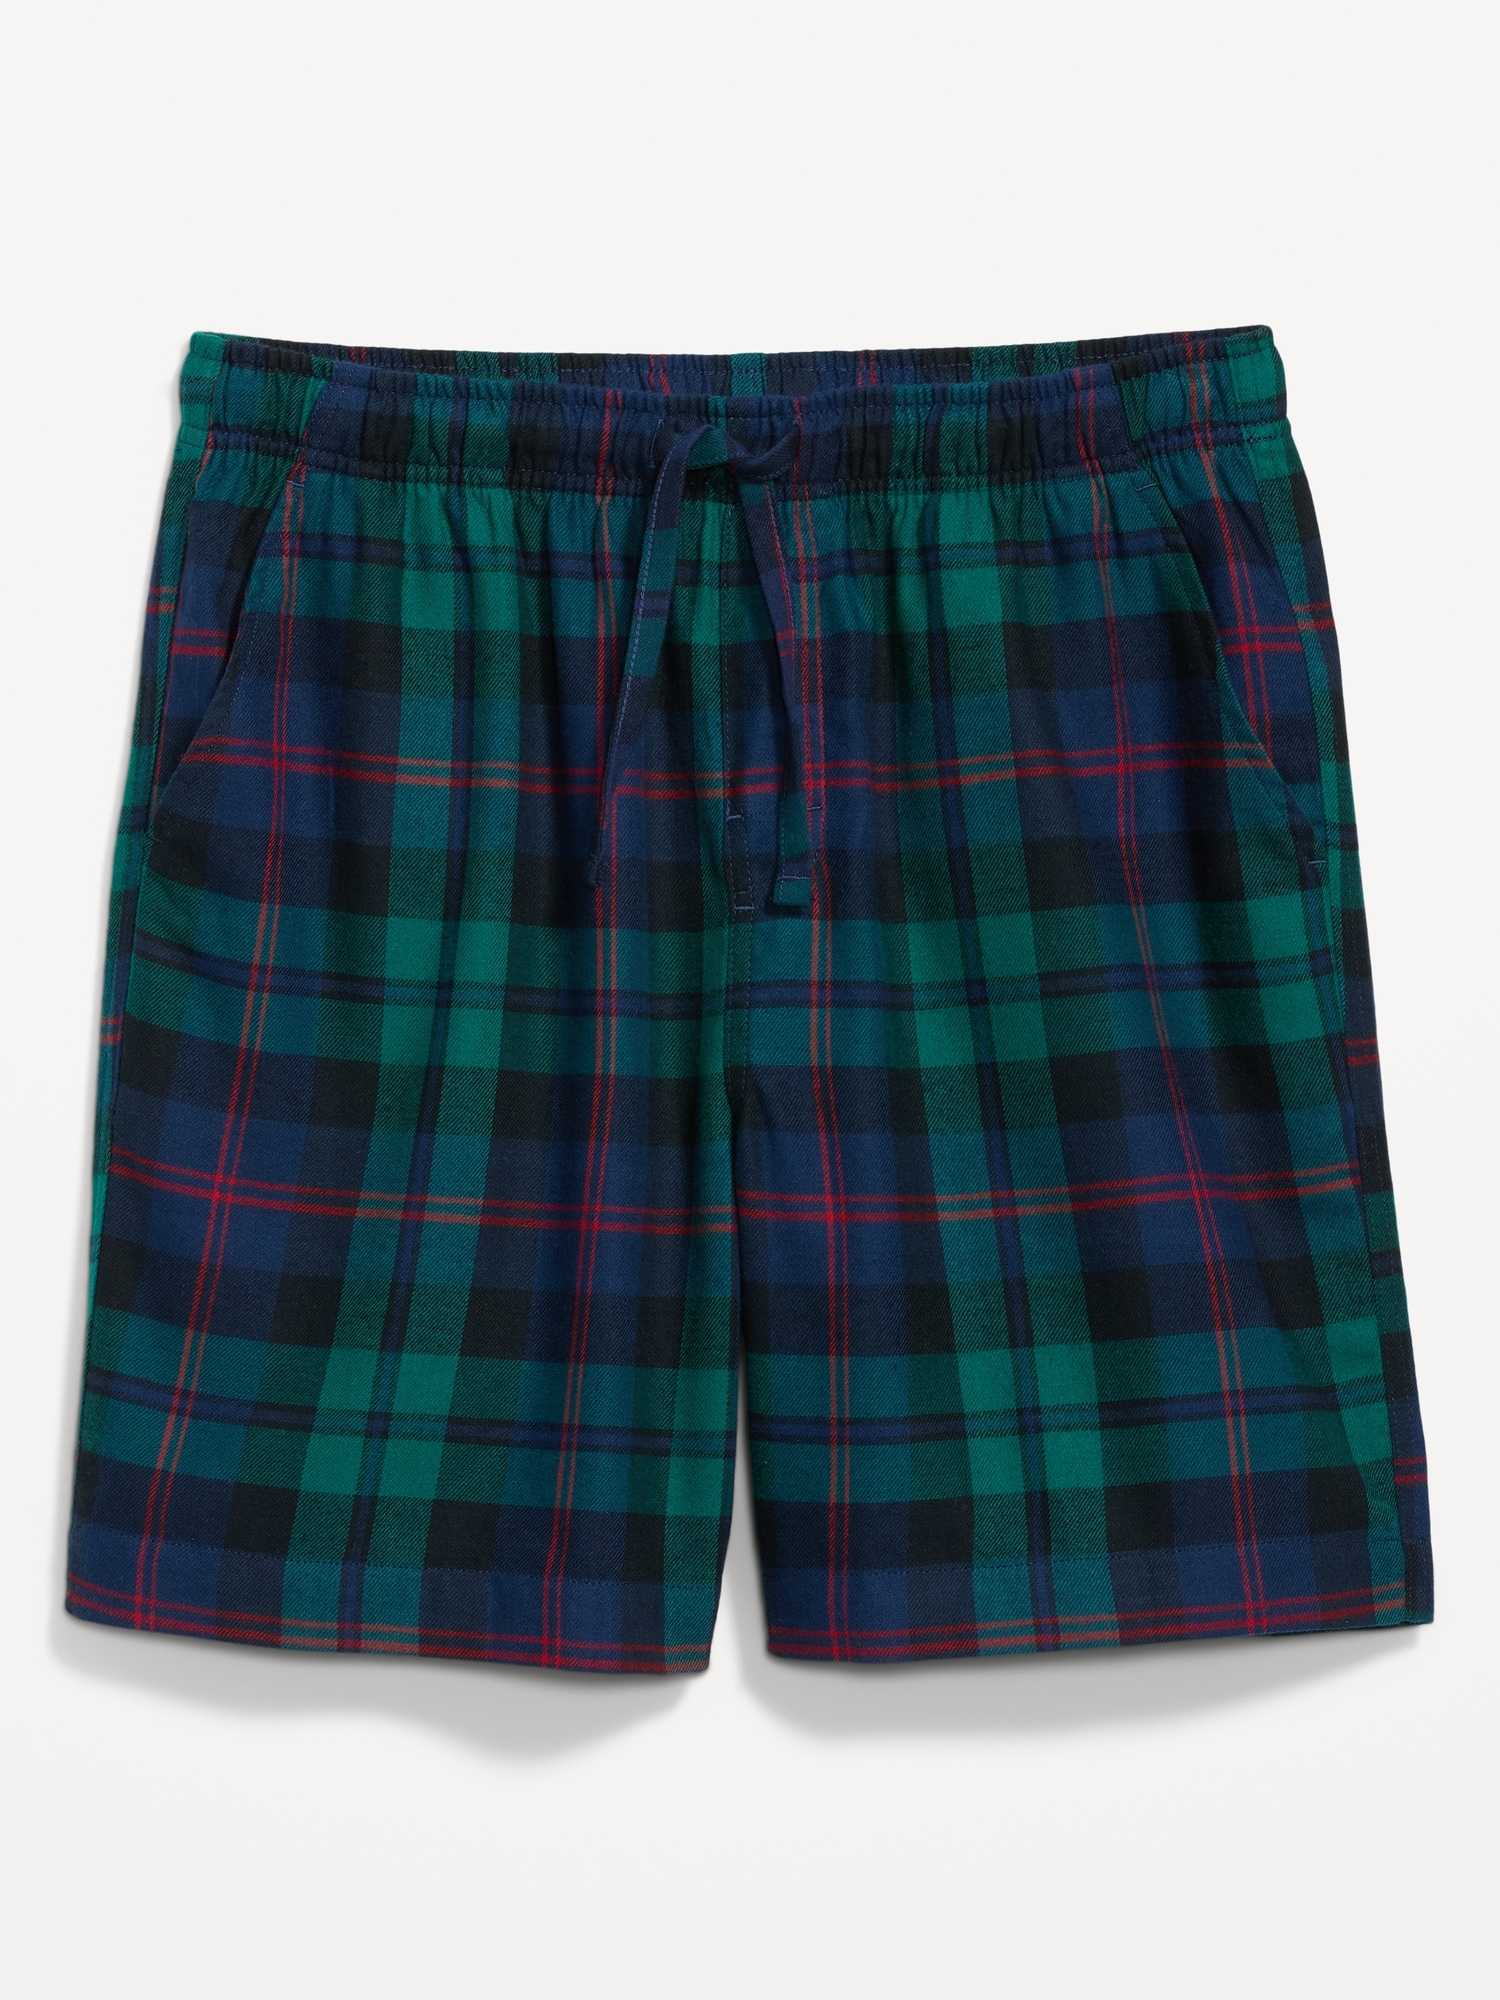 Old Navy Plaid Flannel Pajama Shorts for Men - 8-inch inseam Large Tall LT  New